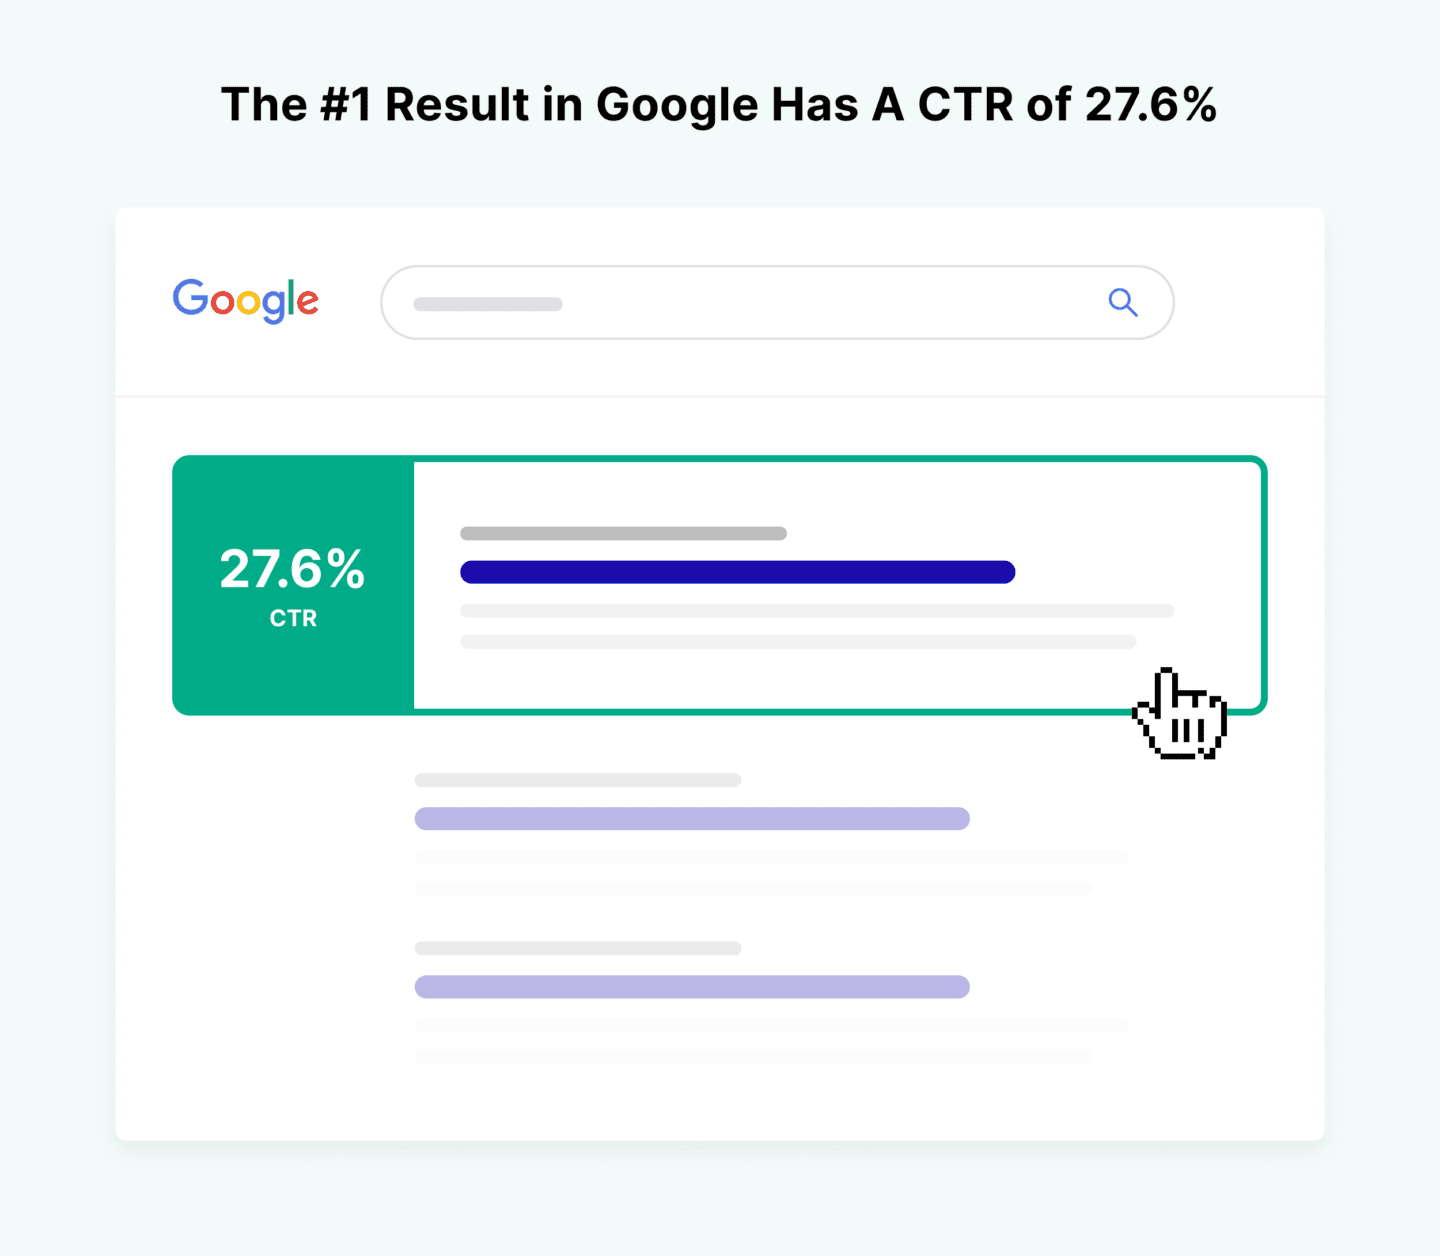 an image showing that the #1 results in Google has a CTR of 27.6%